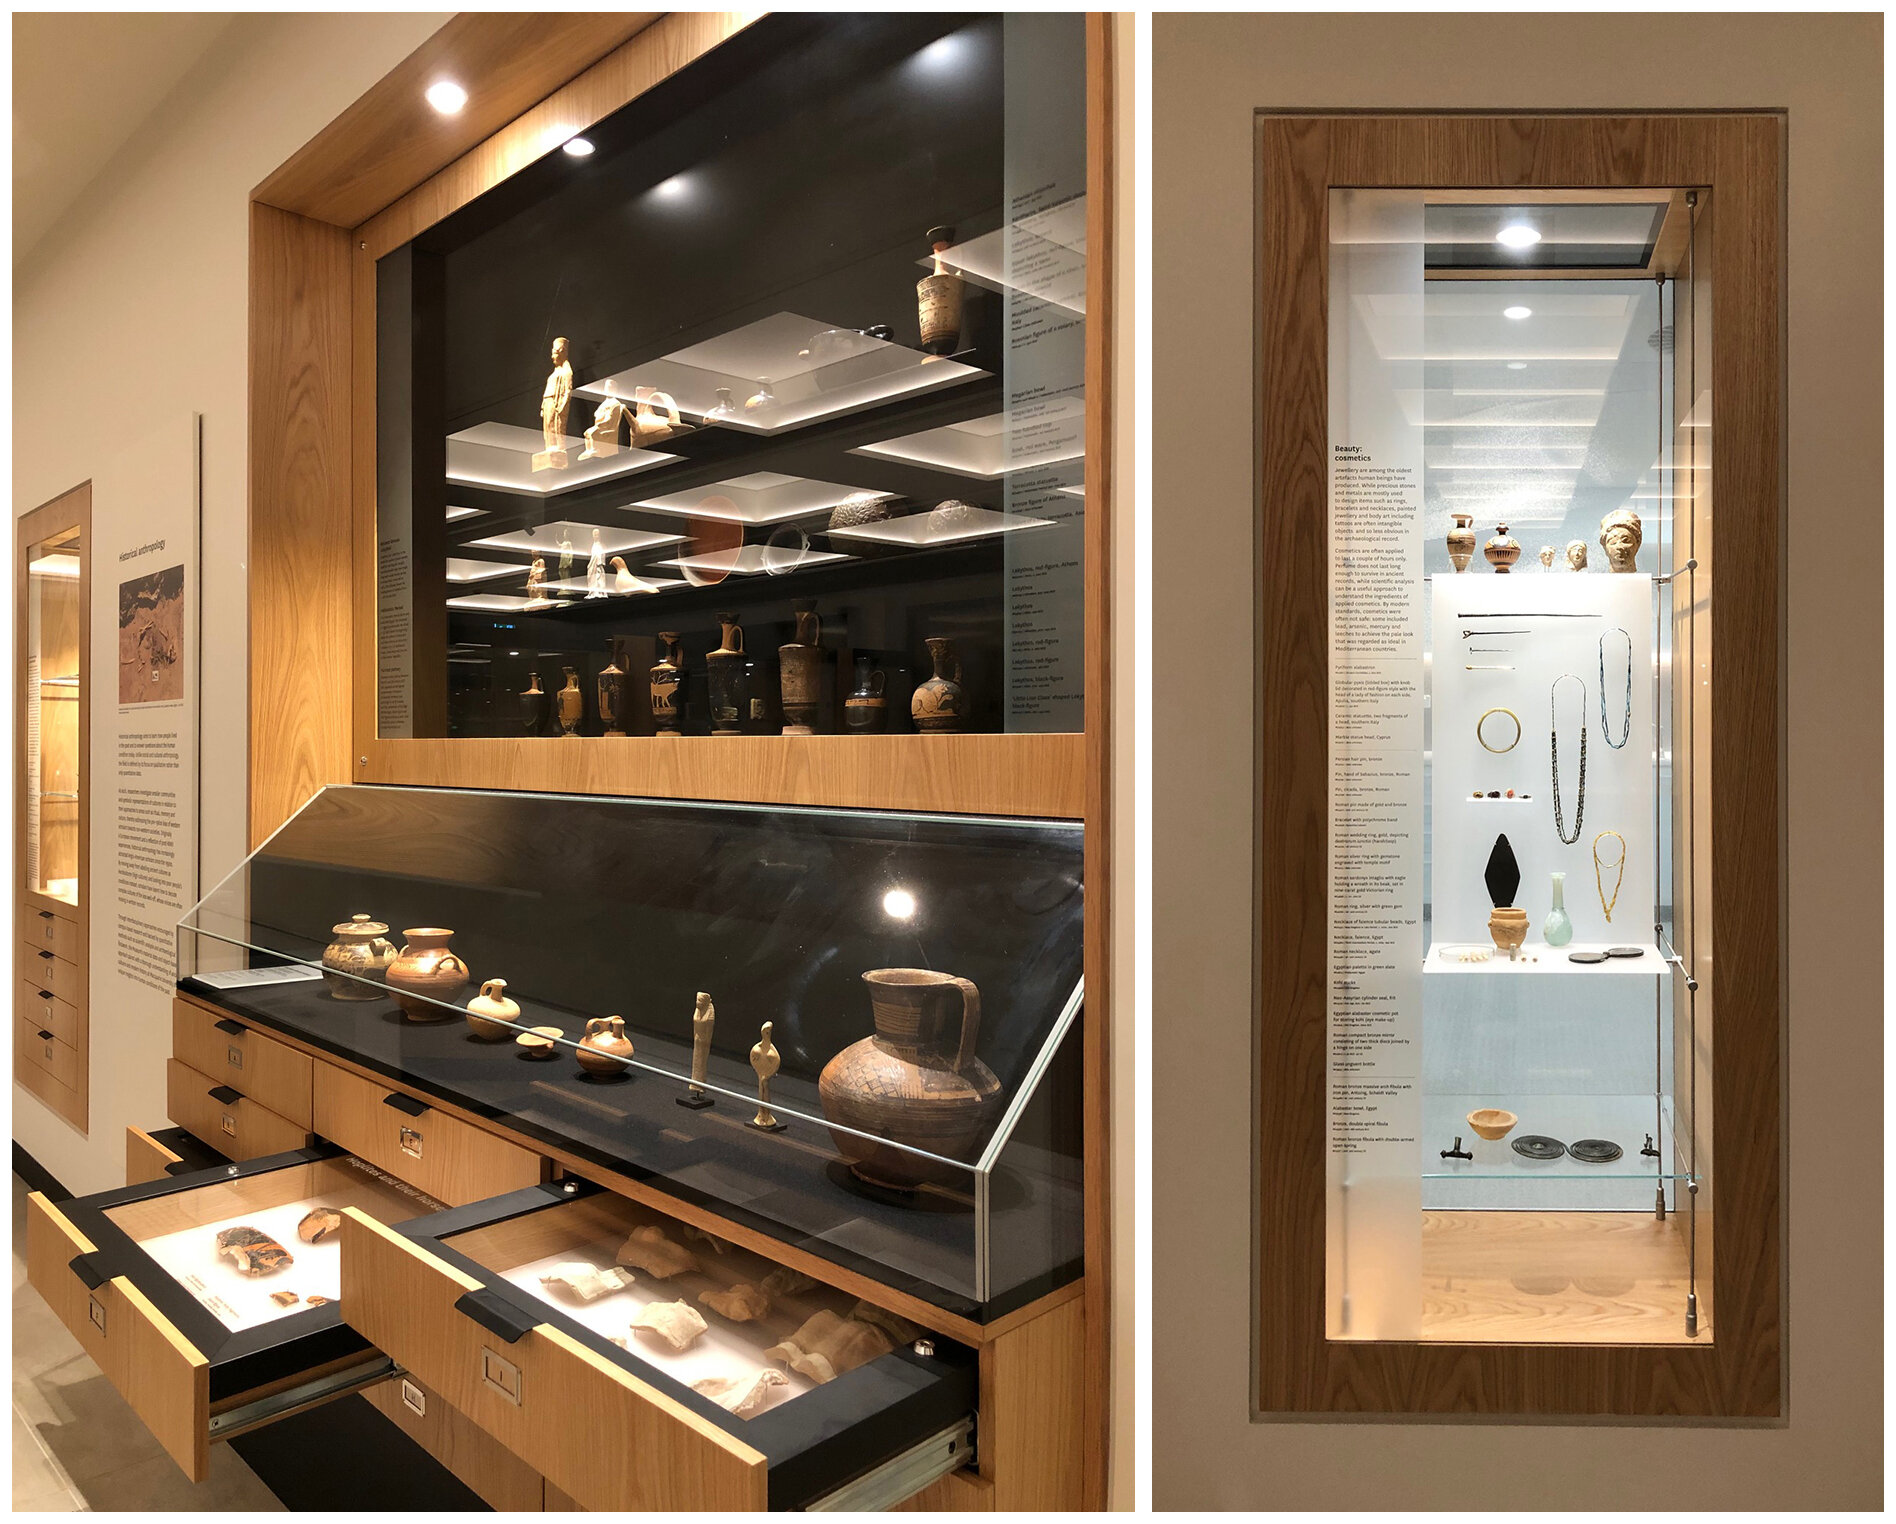 Two photographs of museum cases. The first case contain a glass display section and drawers. Museum case contains complete examples of pottery. Drawers contain examples of pottery sherds. The second case contains examples of jewelry found in the Ancient world.